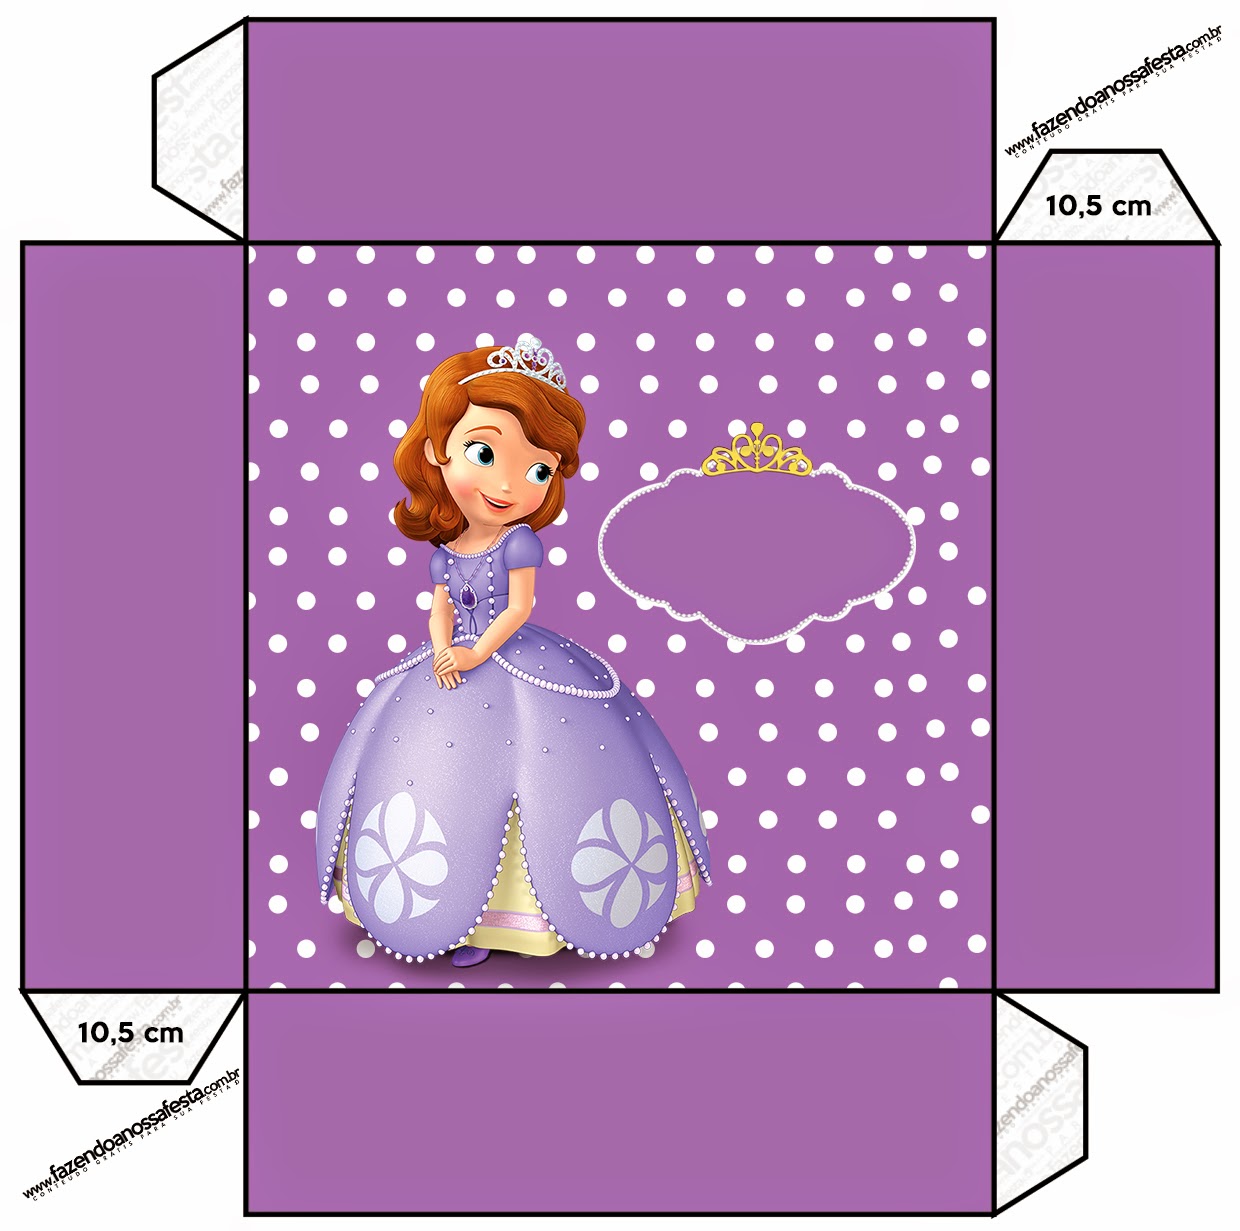 Sofia the First: Free Printable Boxes. - Oh My Fiesta! in english